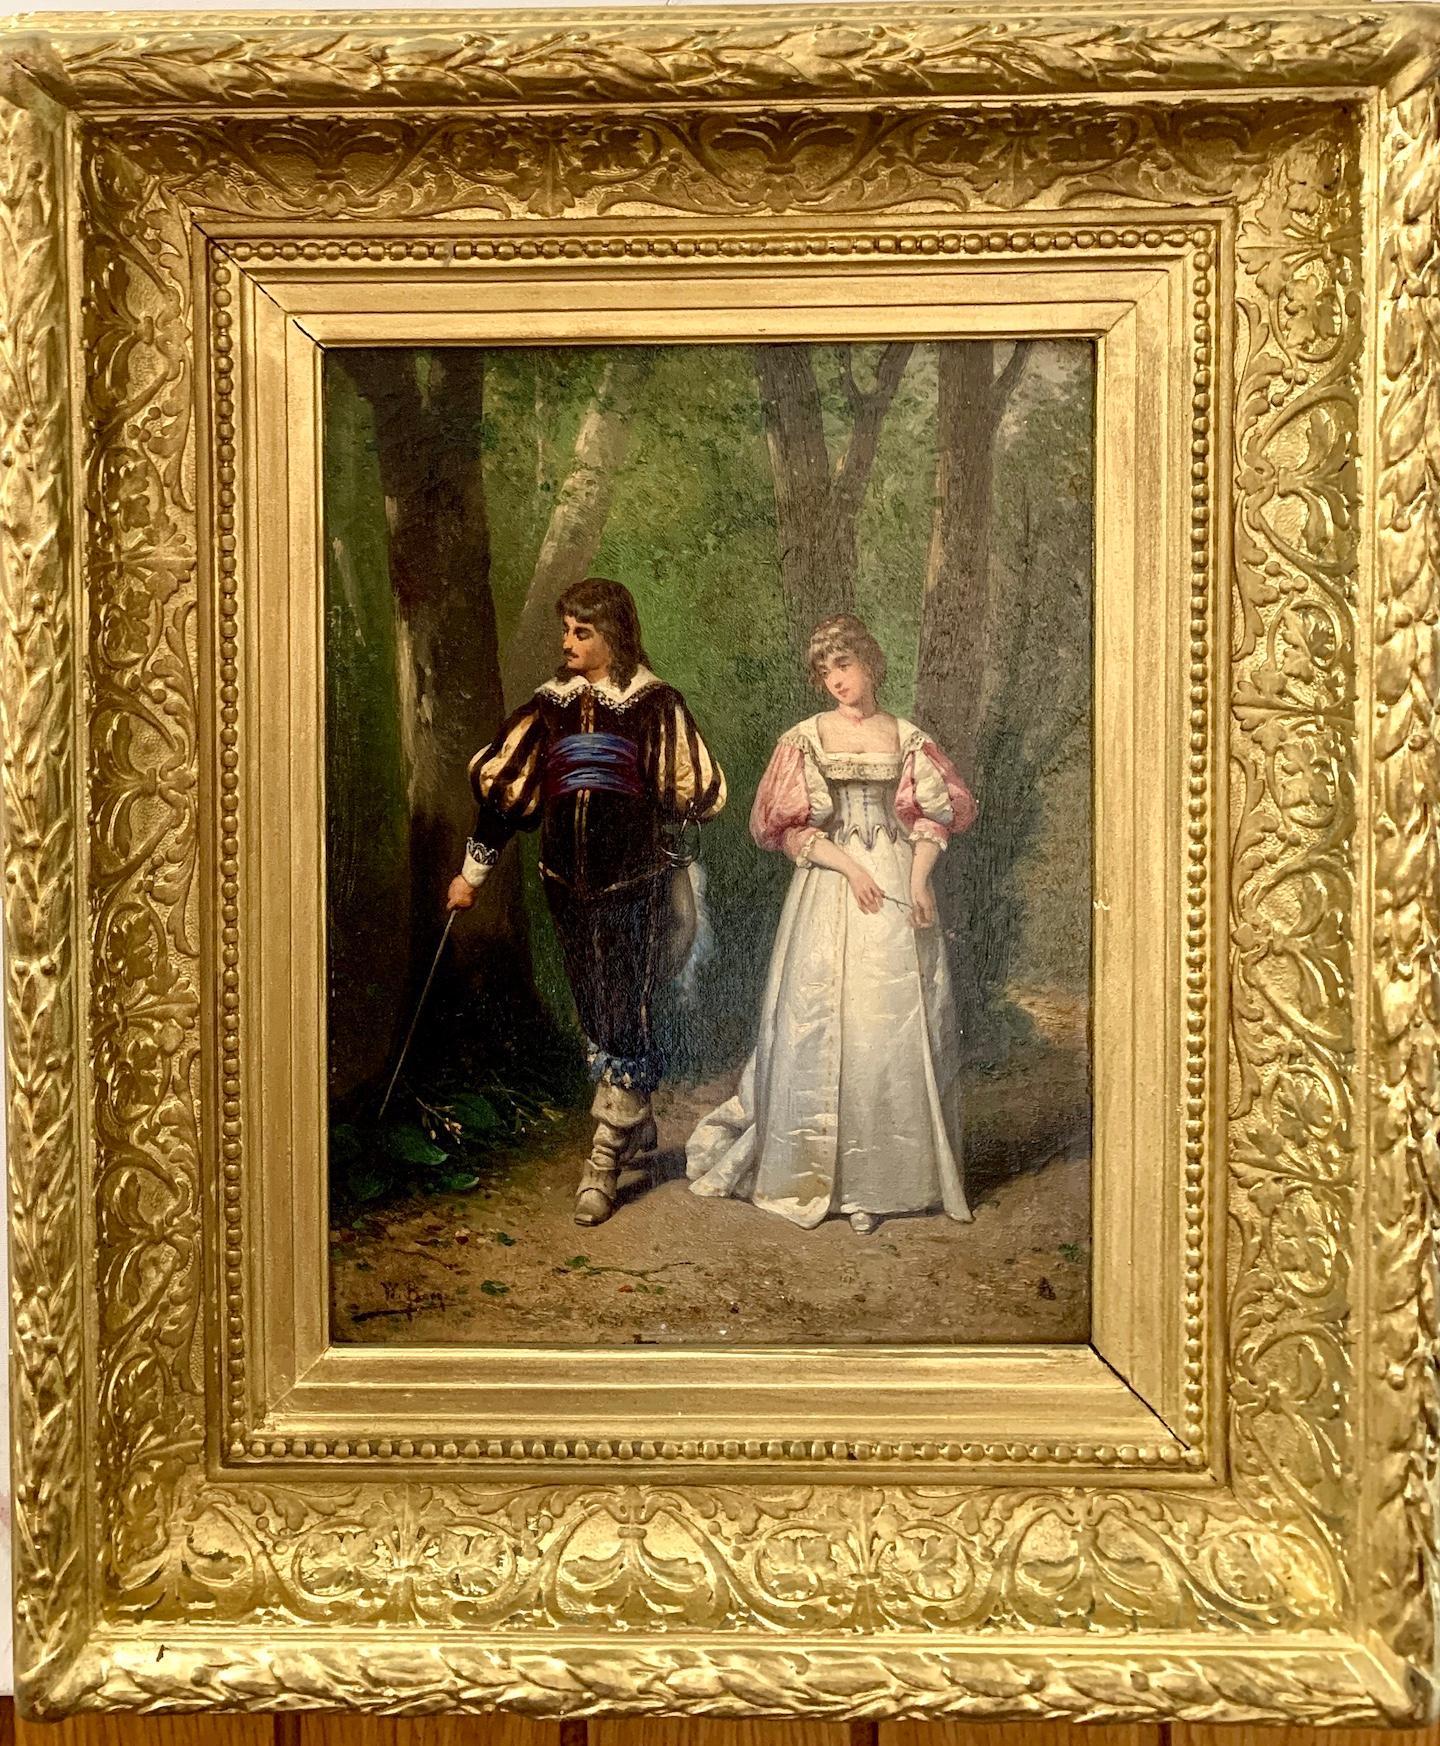 W. Burque - 19th century French scene of Lovers walking in a Garden, in  17th century costume For Sale at 1stDibs